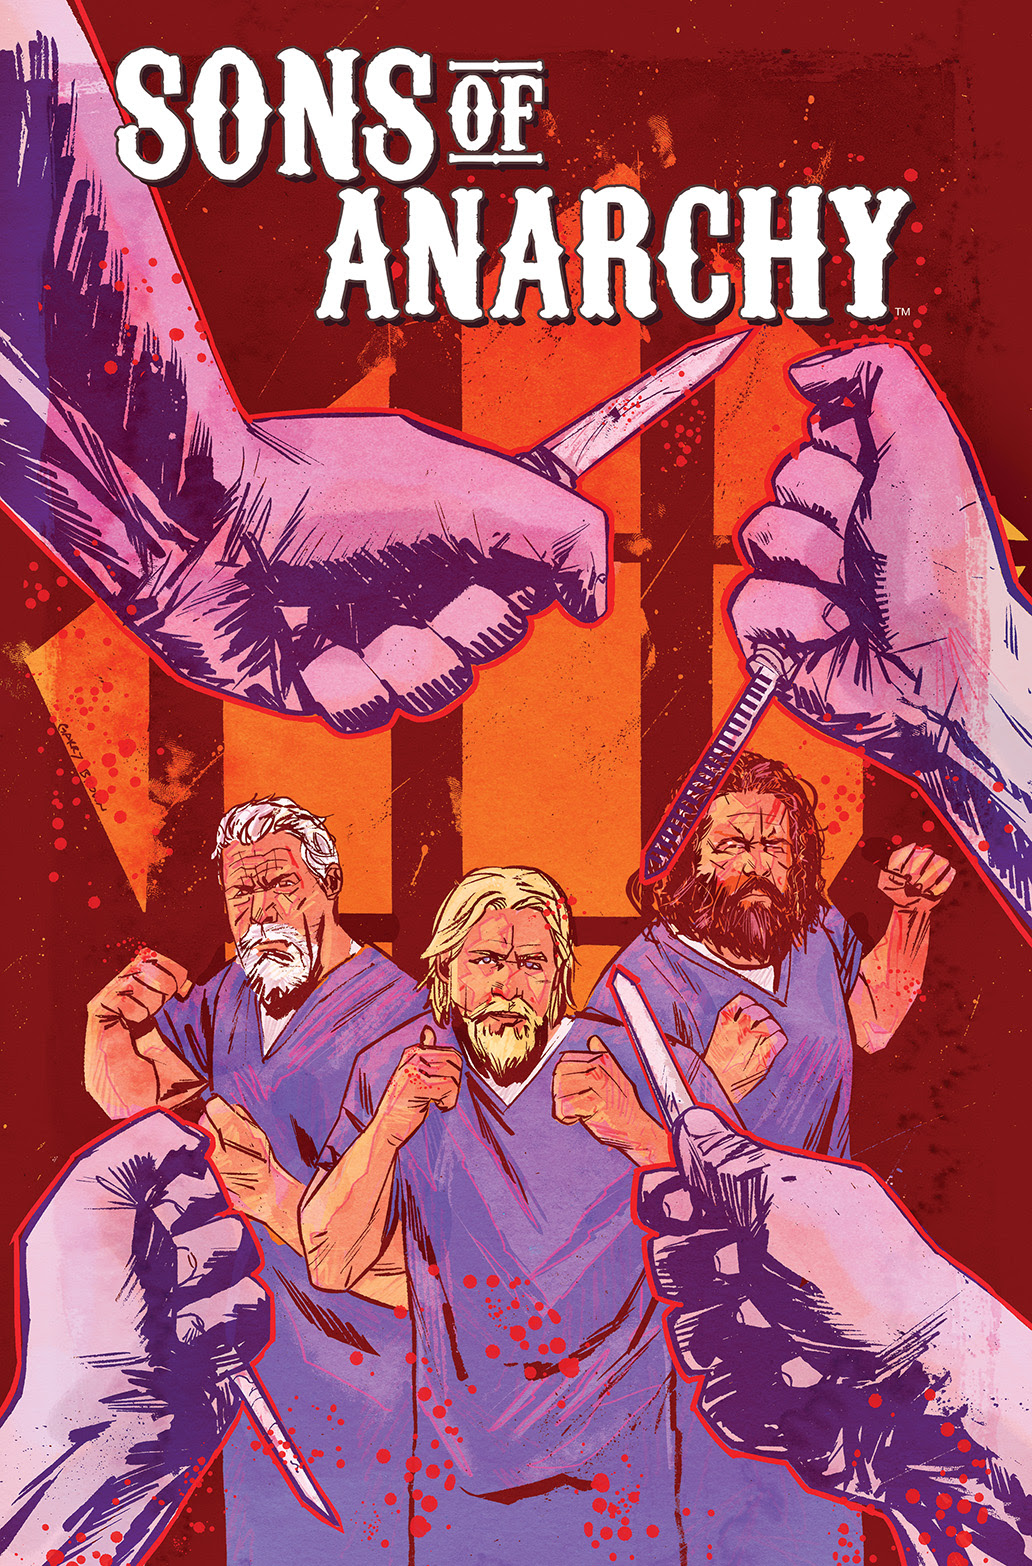 SONS OF ANARCHY #10 Cover by Garry Brown